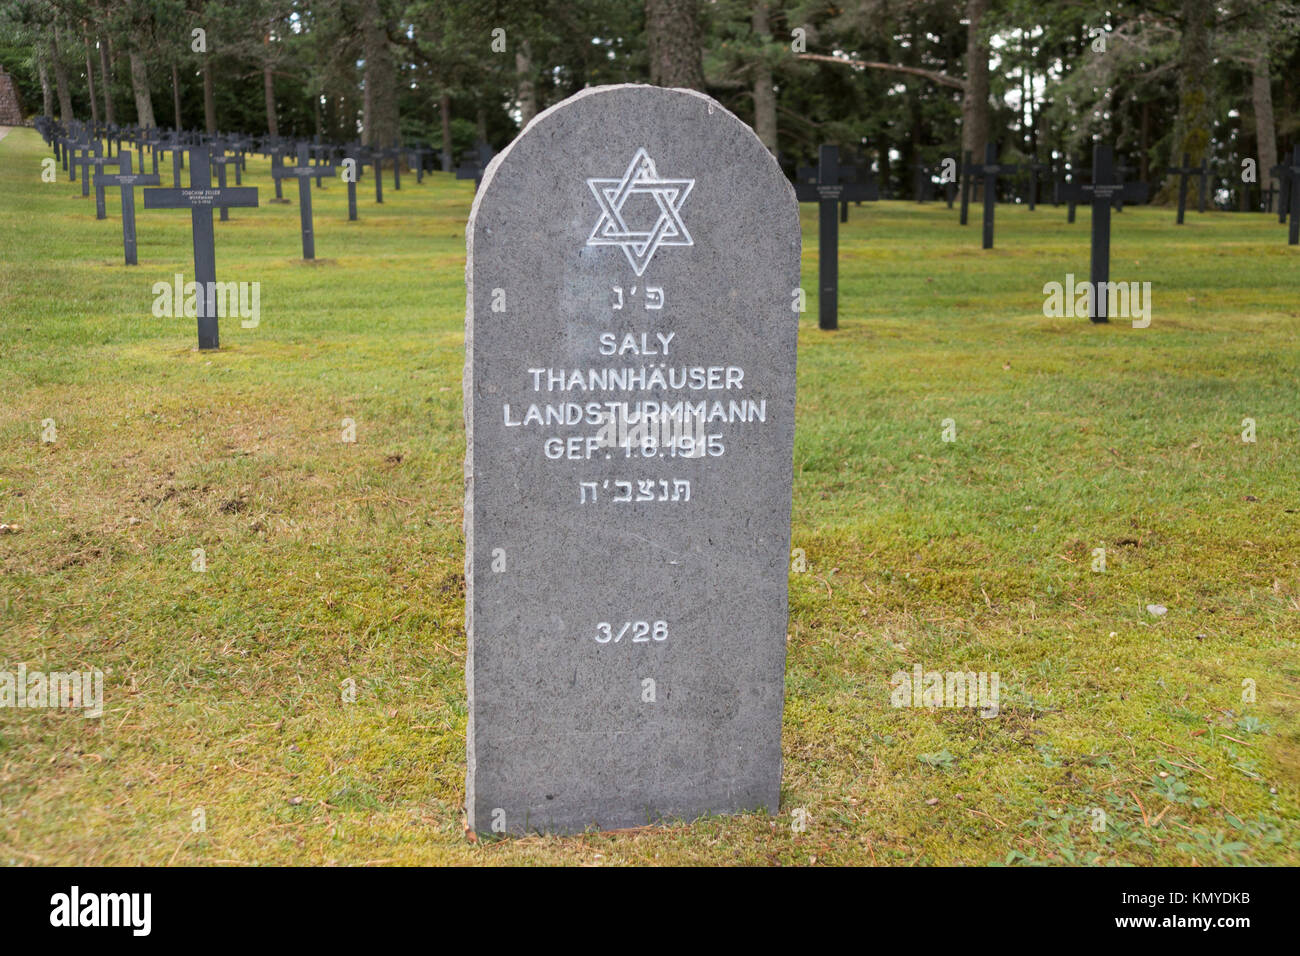 A Jewish headstone marking the grave of a WW1 German soldier at the German military cemetery at Hohrod, Alsace Stock Photo